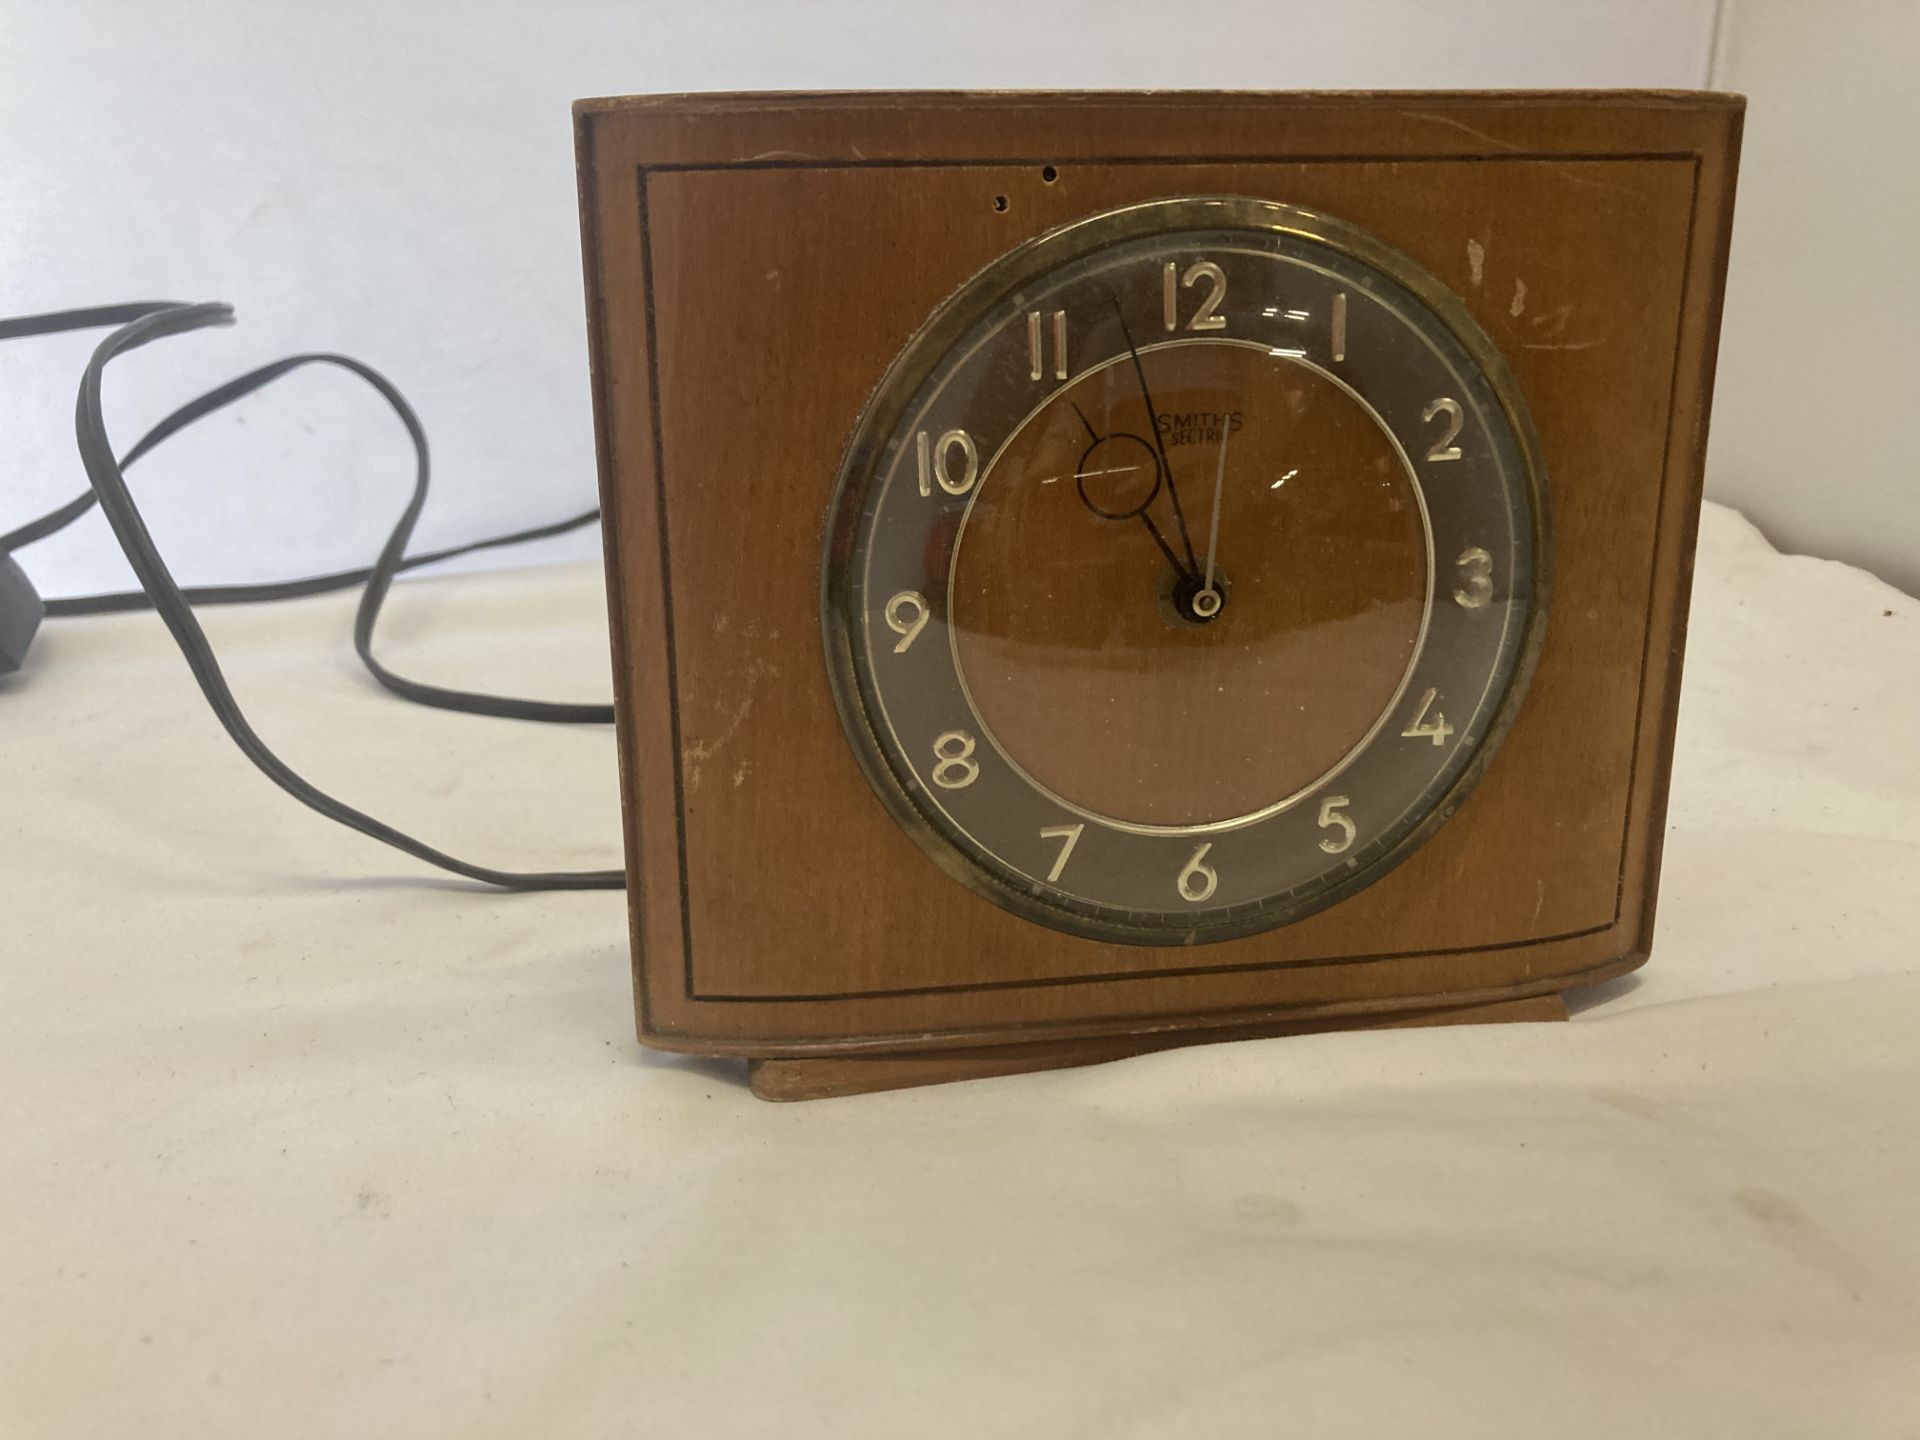 TWO MAHOGANY CASED WALL CLOCKS, A WESTCLOX 'BIG BEN' ALARM CLOCK, A SMITHS VINTAGE ELECTRIC MANTLE - Image 12 of 21